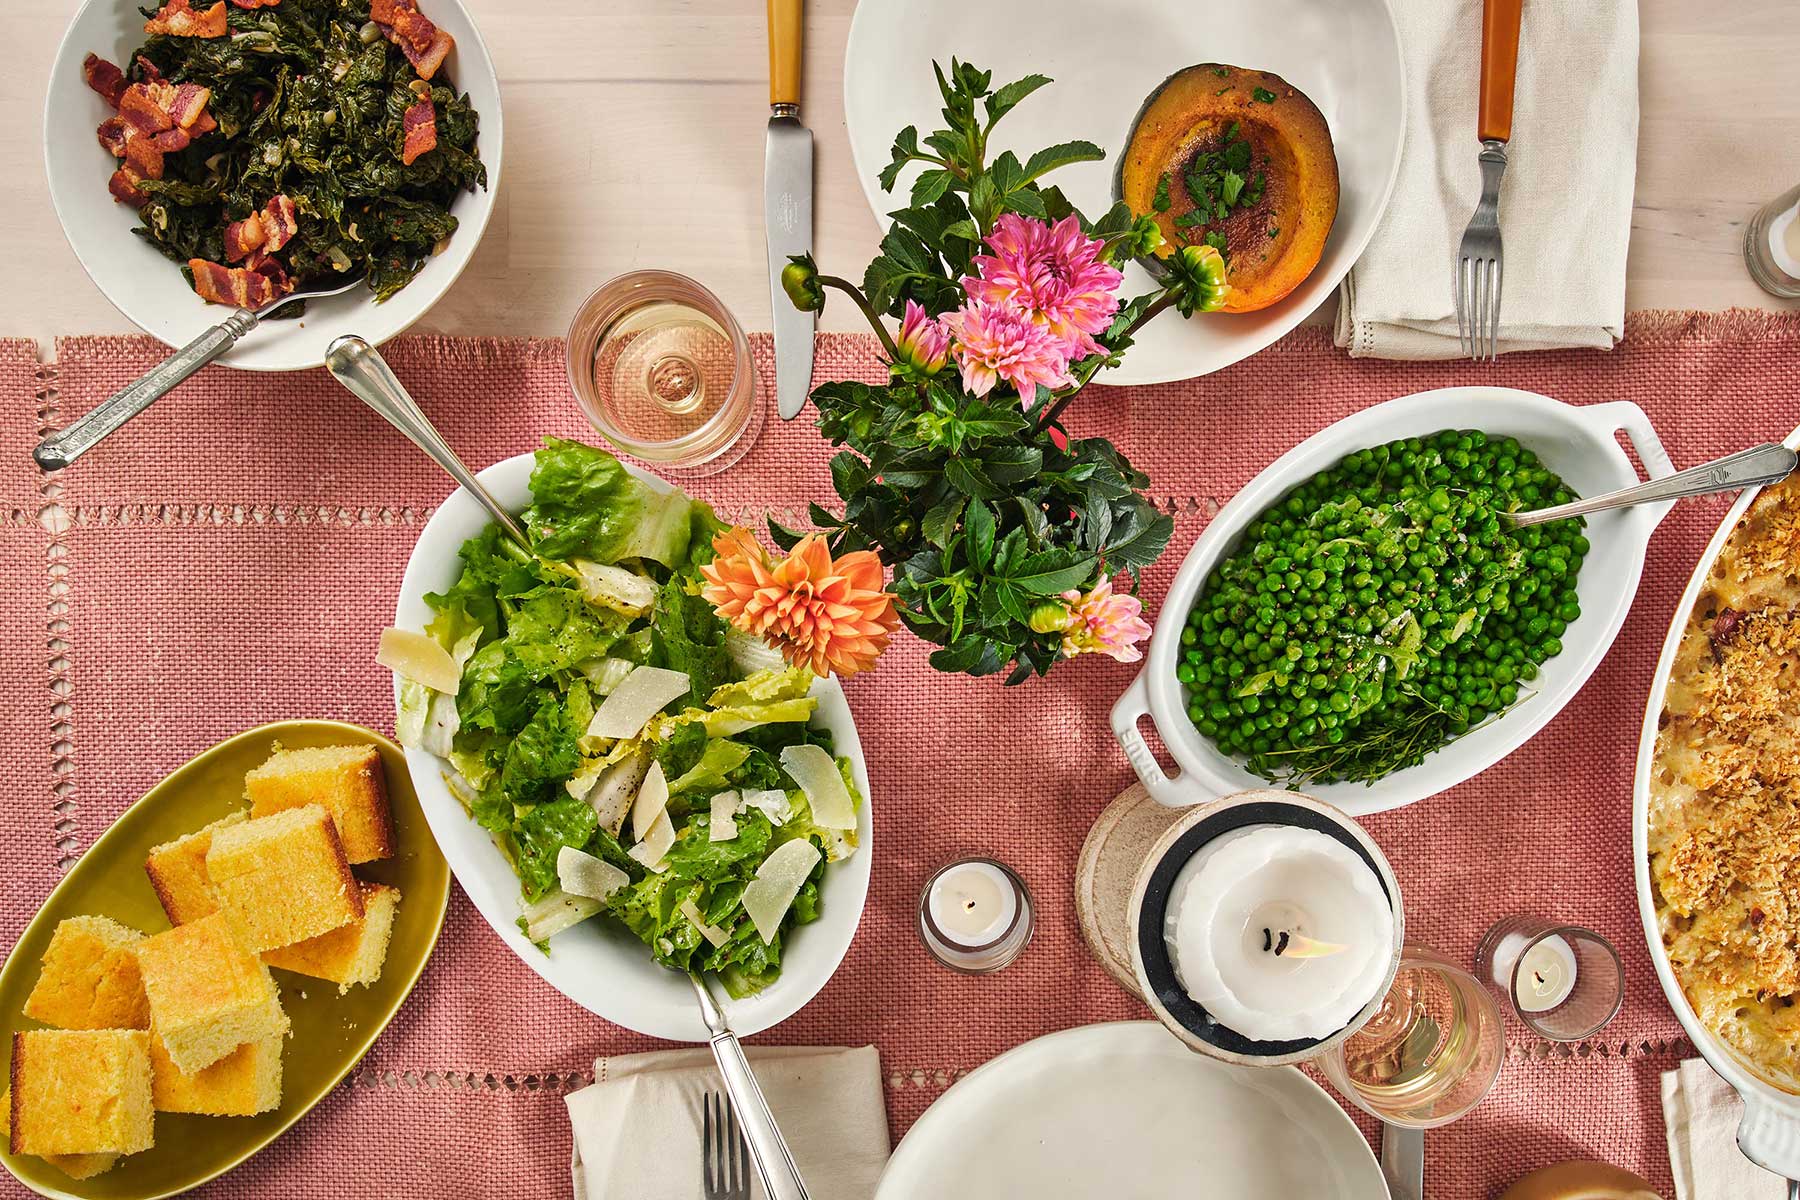 Escarole Salad set on a table with flowers, bread, peas, and a candle.